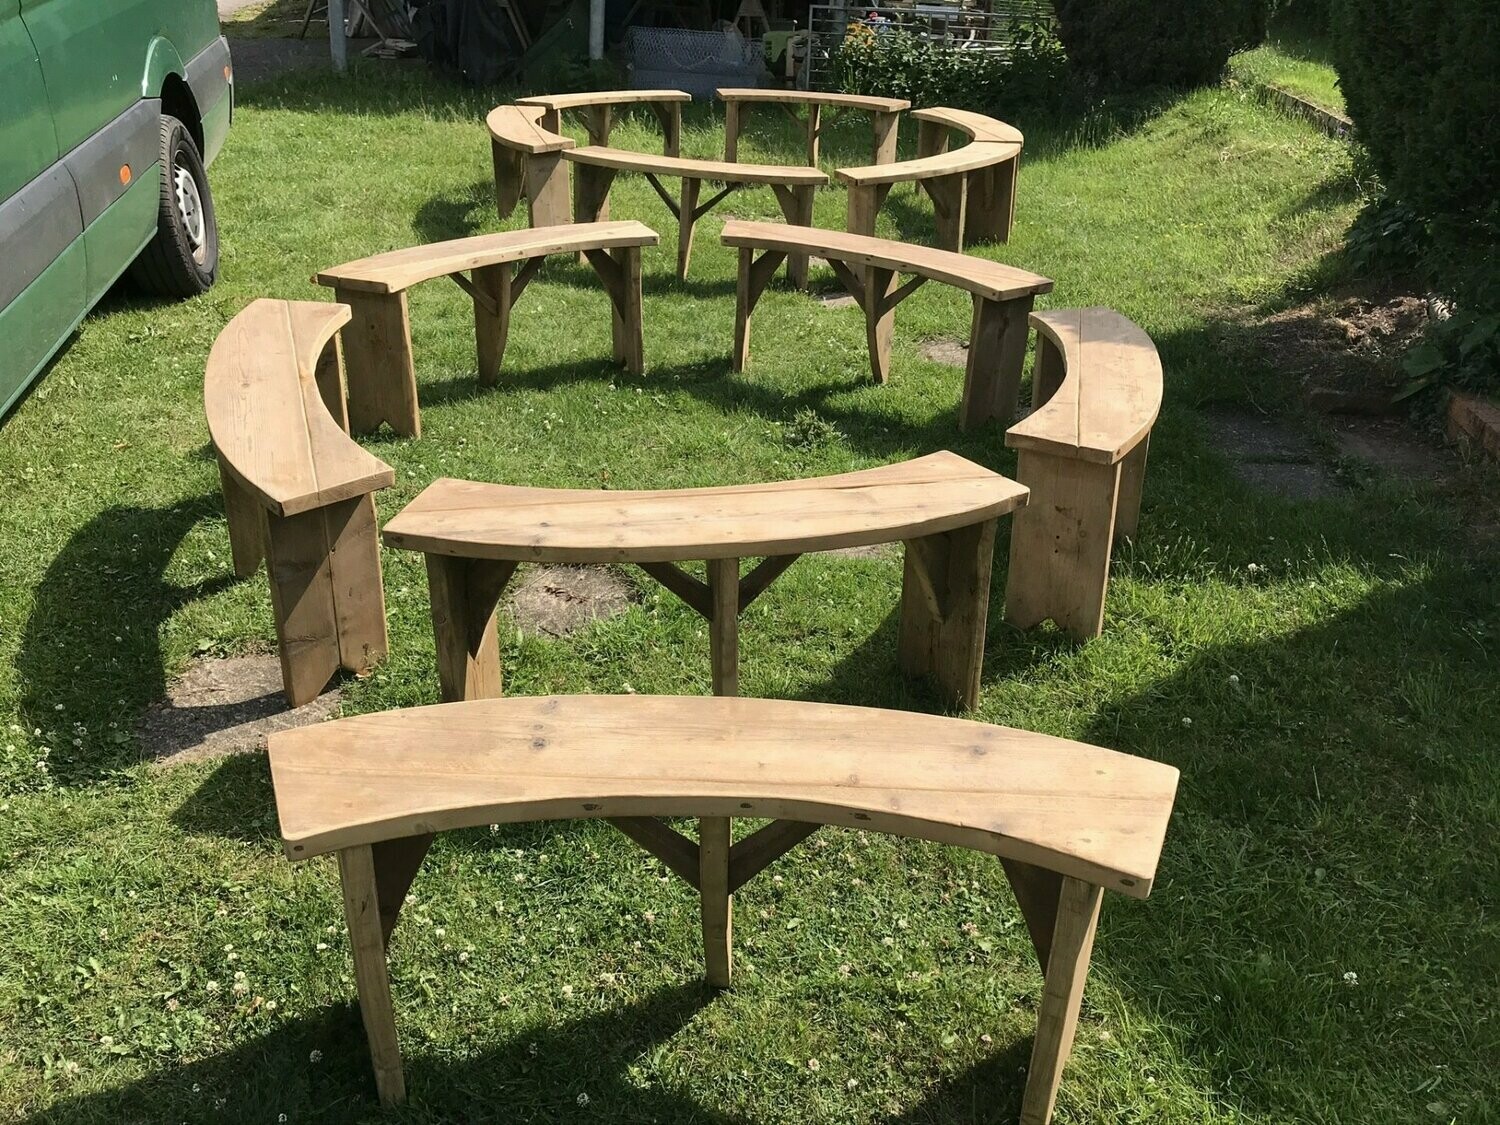 3 x 4ft Curved Bench hand made reclaimed timber Garden Fire Pit Meeting Room School Club Bench. Fire pit bench Curved garden bench Garden Seating. Environmentally friendly.